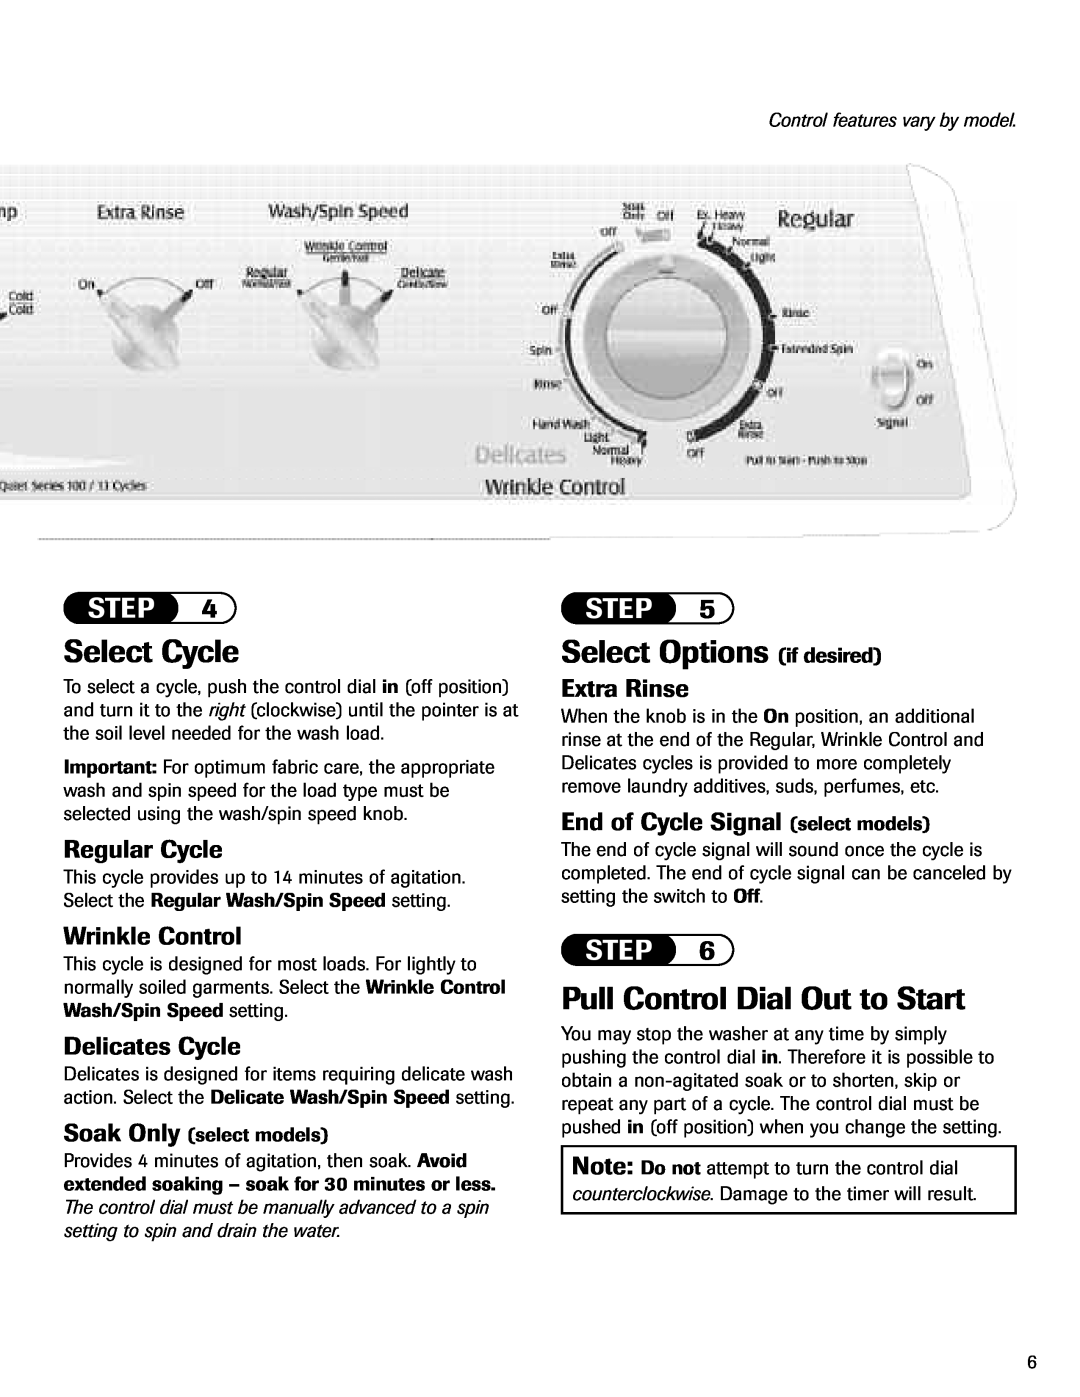 Maytag MAV-3 Select Cycle, Select Options if desired, Pull Control Dial Out to Start, Regular Cycle, Wrinkle Control, Step 